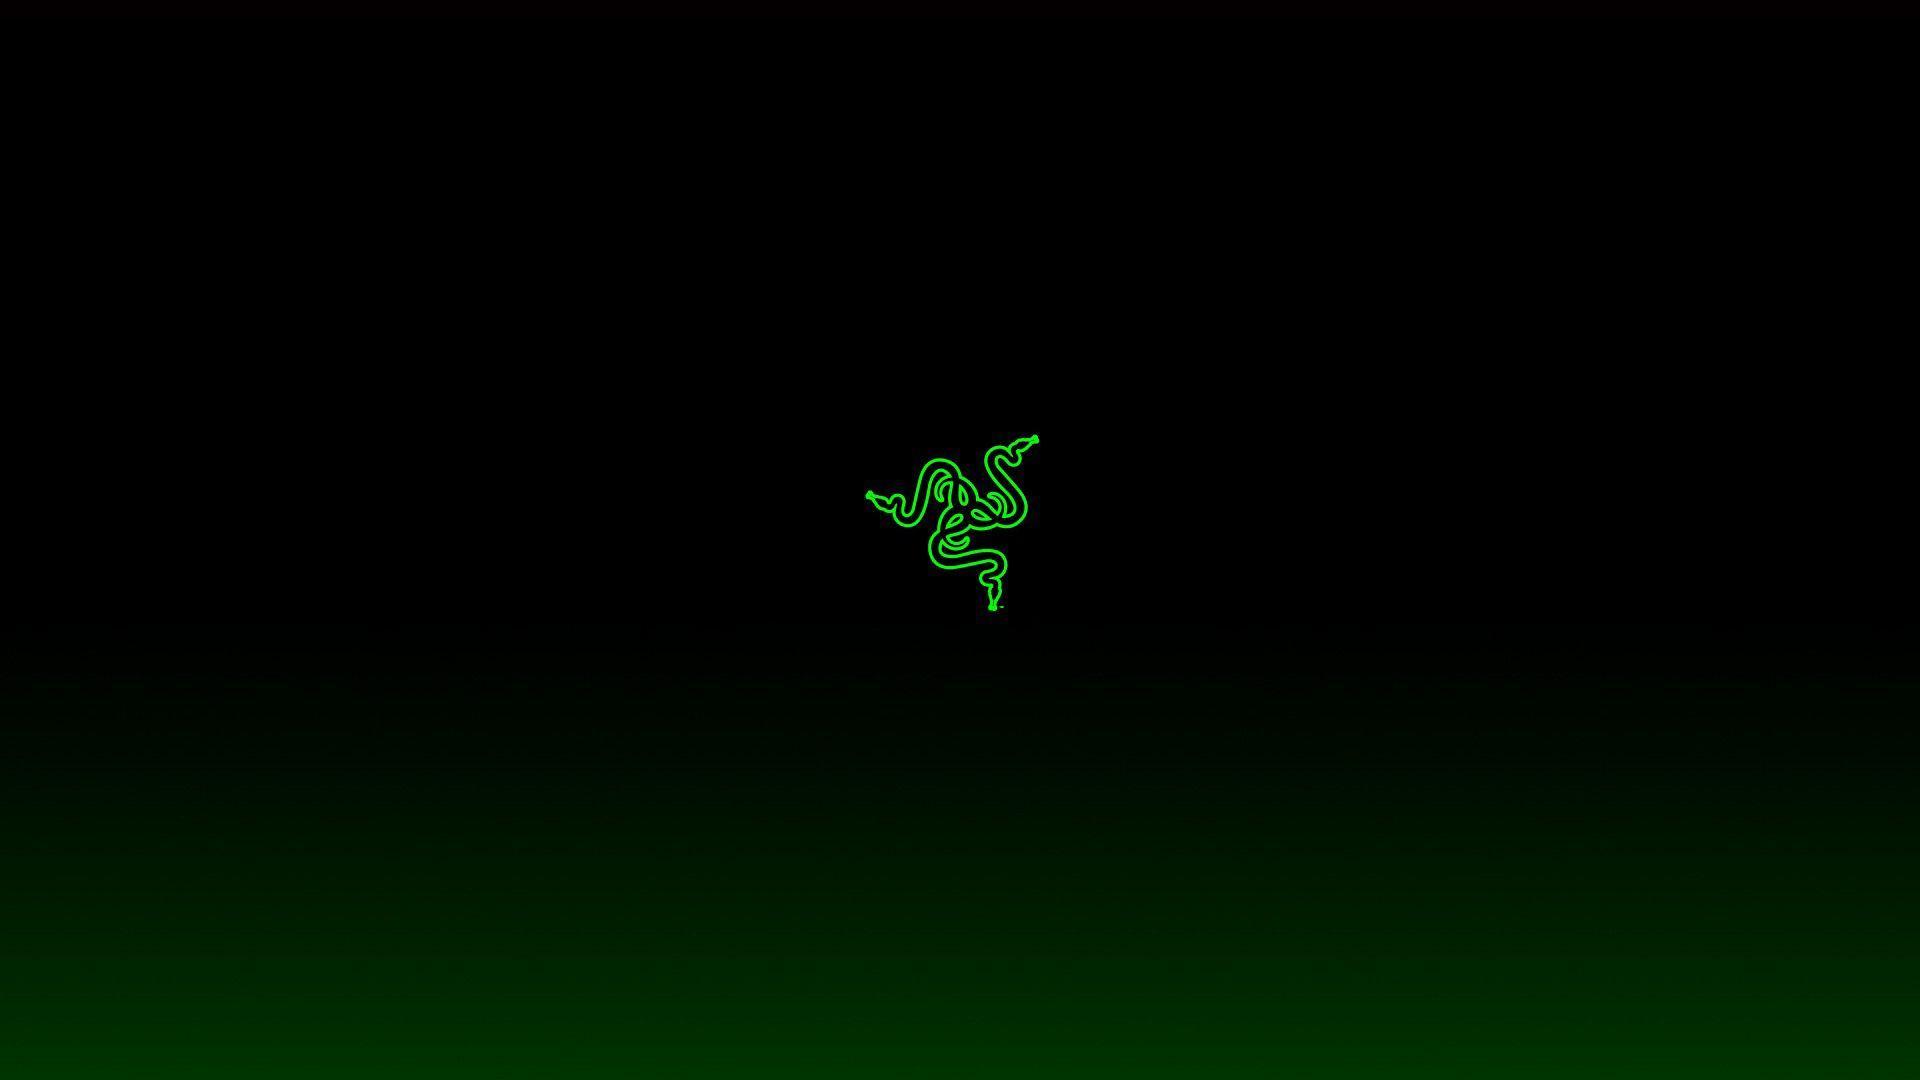 Download Razer wallpapers virtual backgrounds and videos  Razer  AsiaPacific